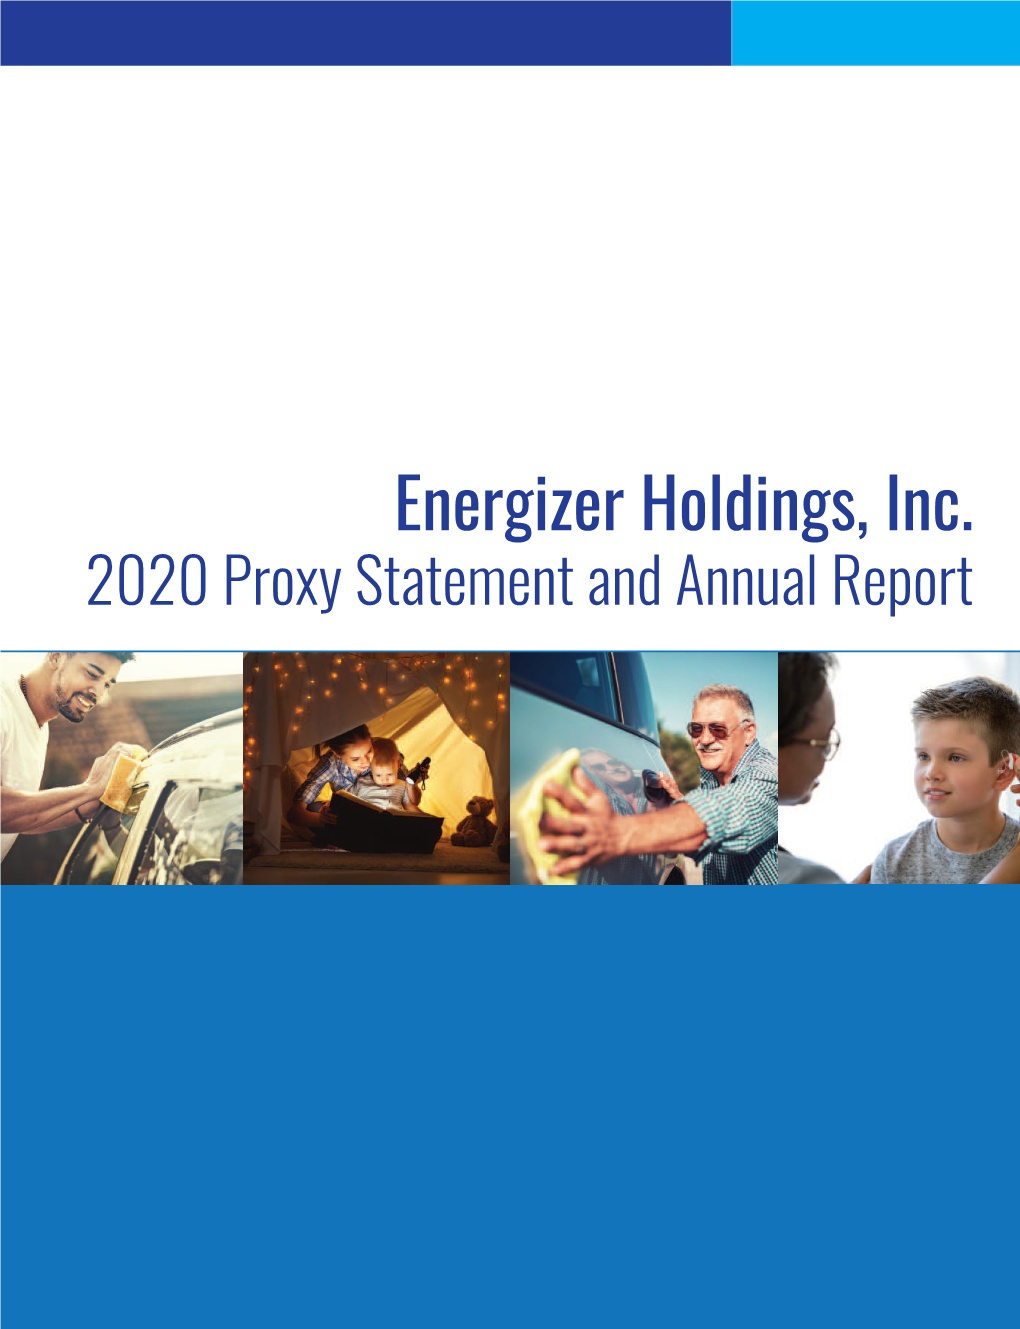 Energizer Holdings, Inc. 2020 Proxy Statement I This Summary Includes Certain Financial, Operational, Governance and Executive Compensation PROXY STATEMENT Highlights